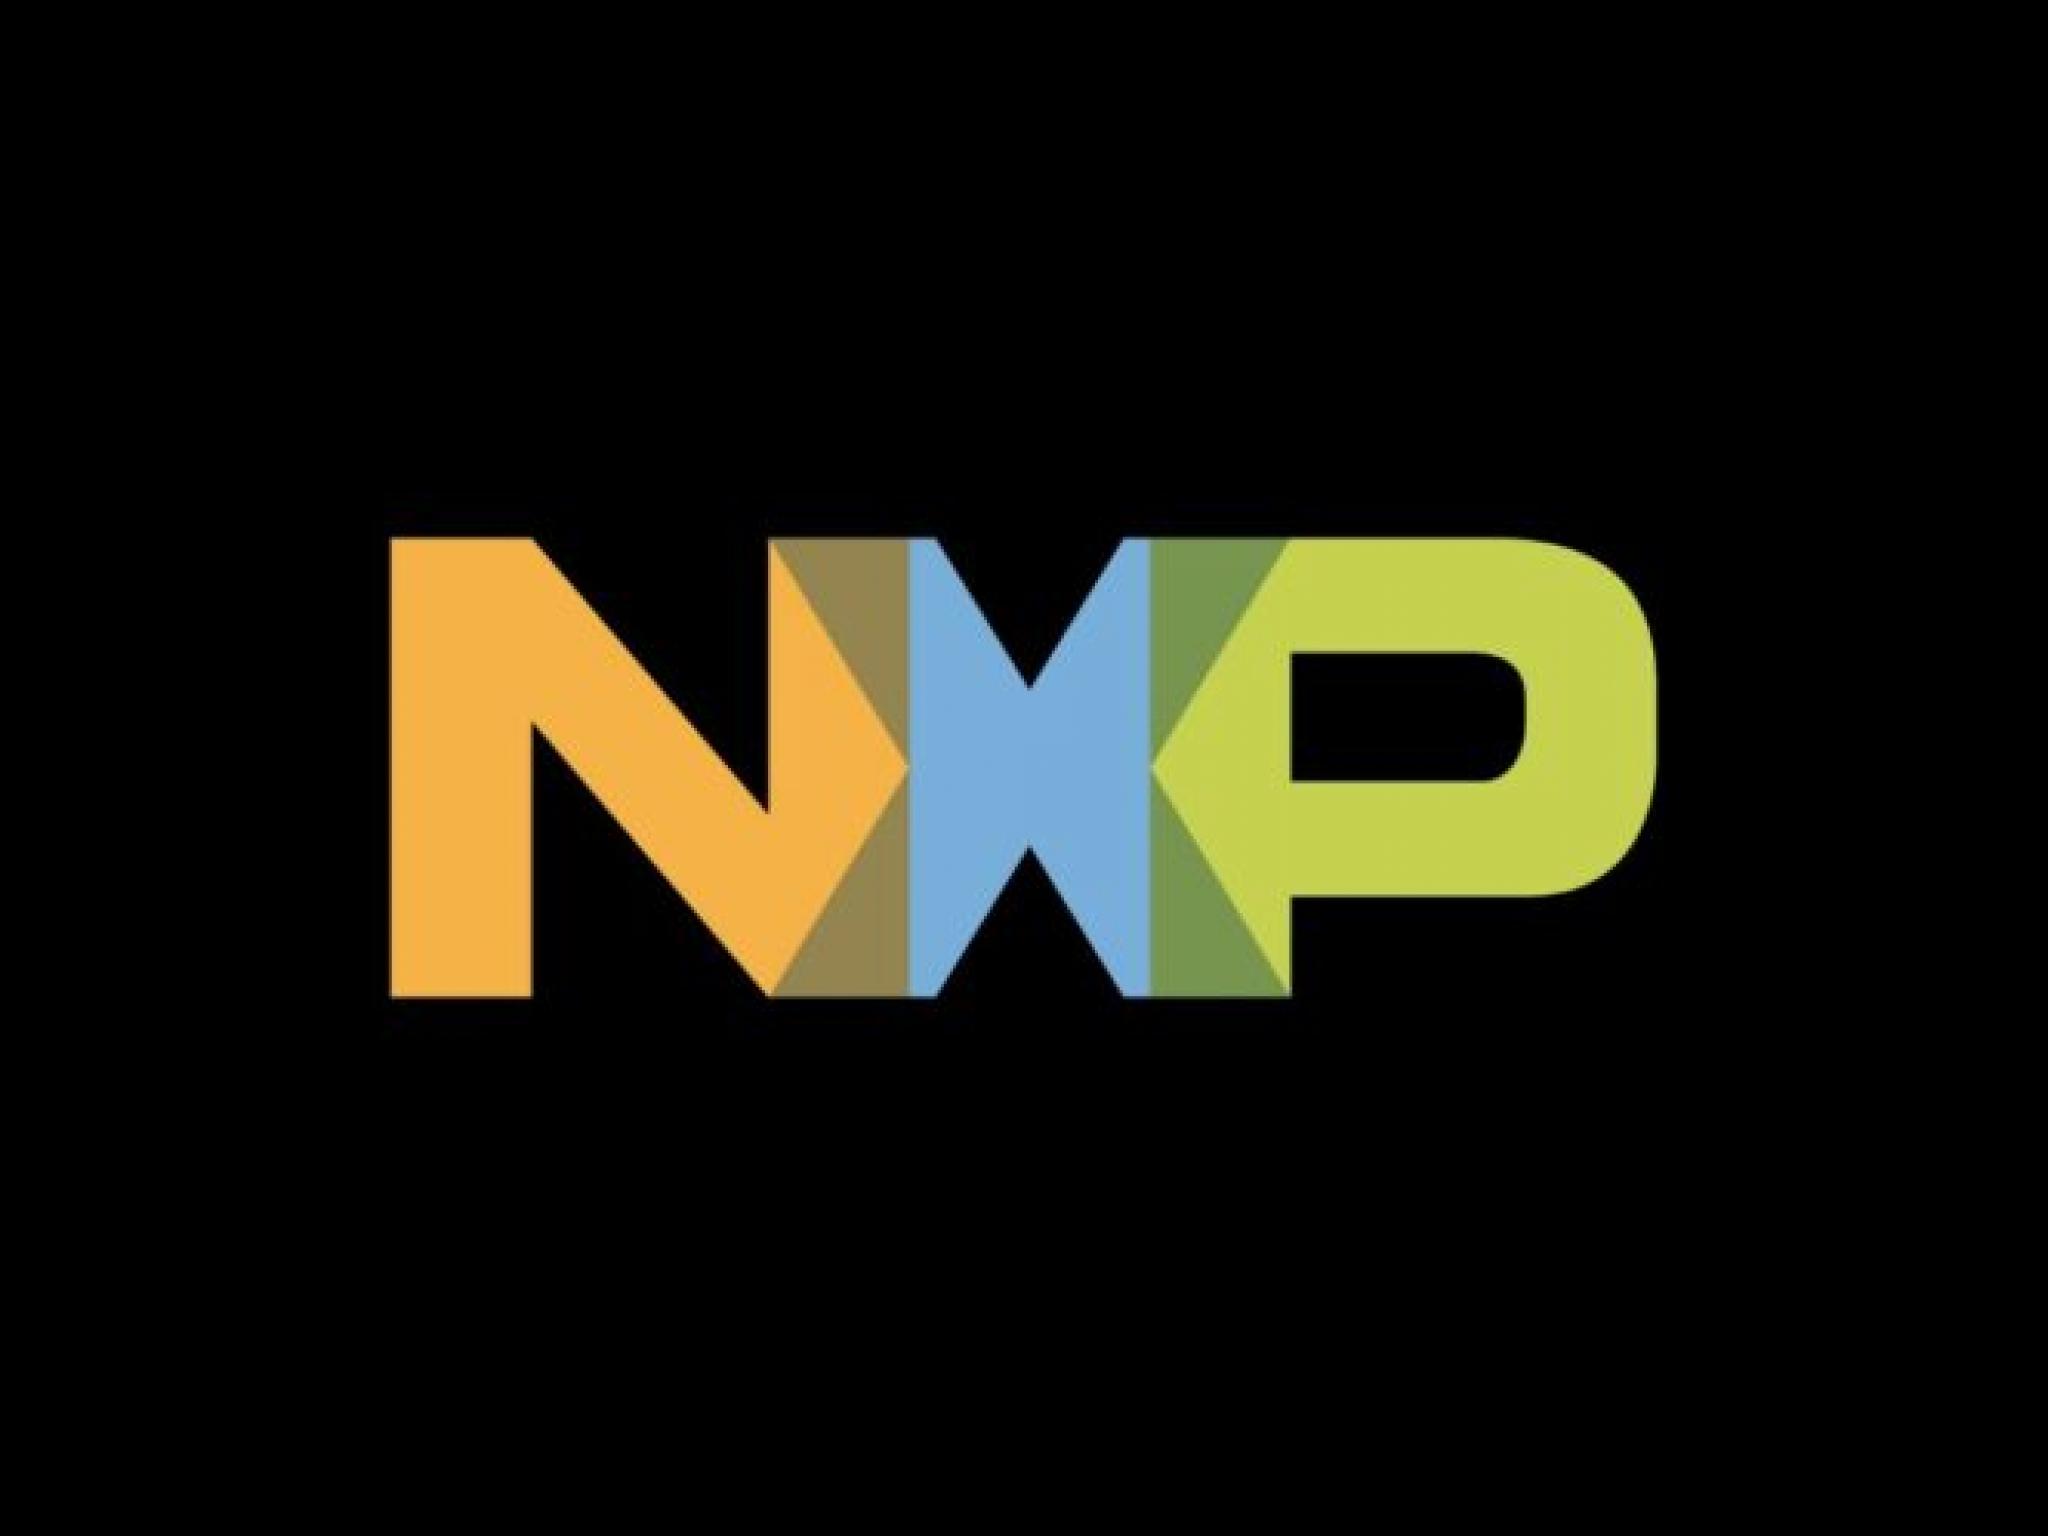  this-nxp-semiconductors-analyst-turns-bullish-here-are-top-5-upgrades-for-friday 